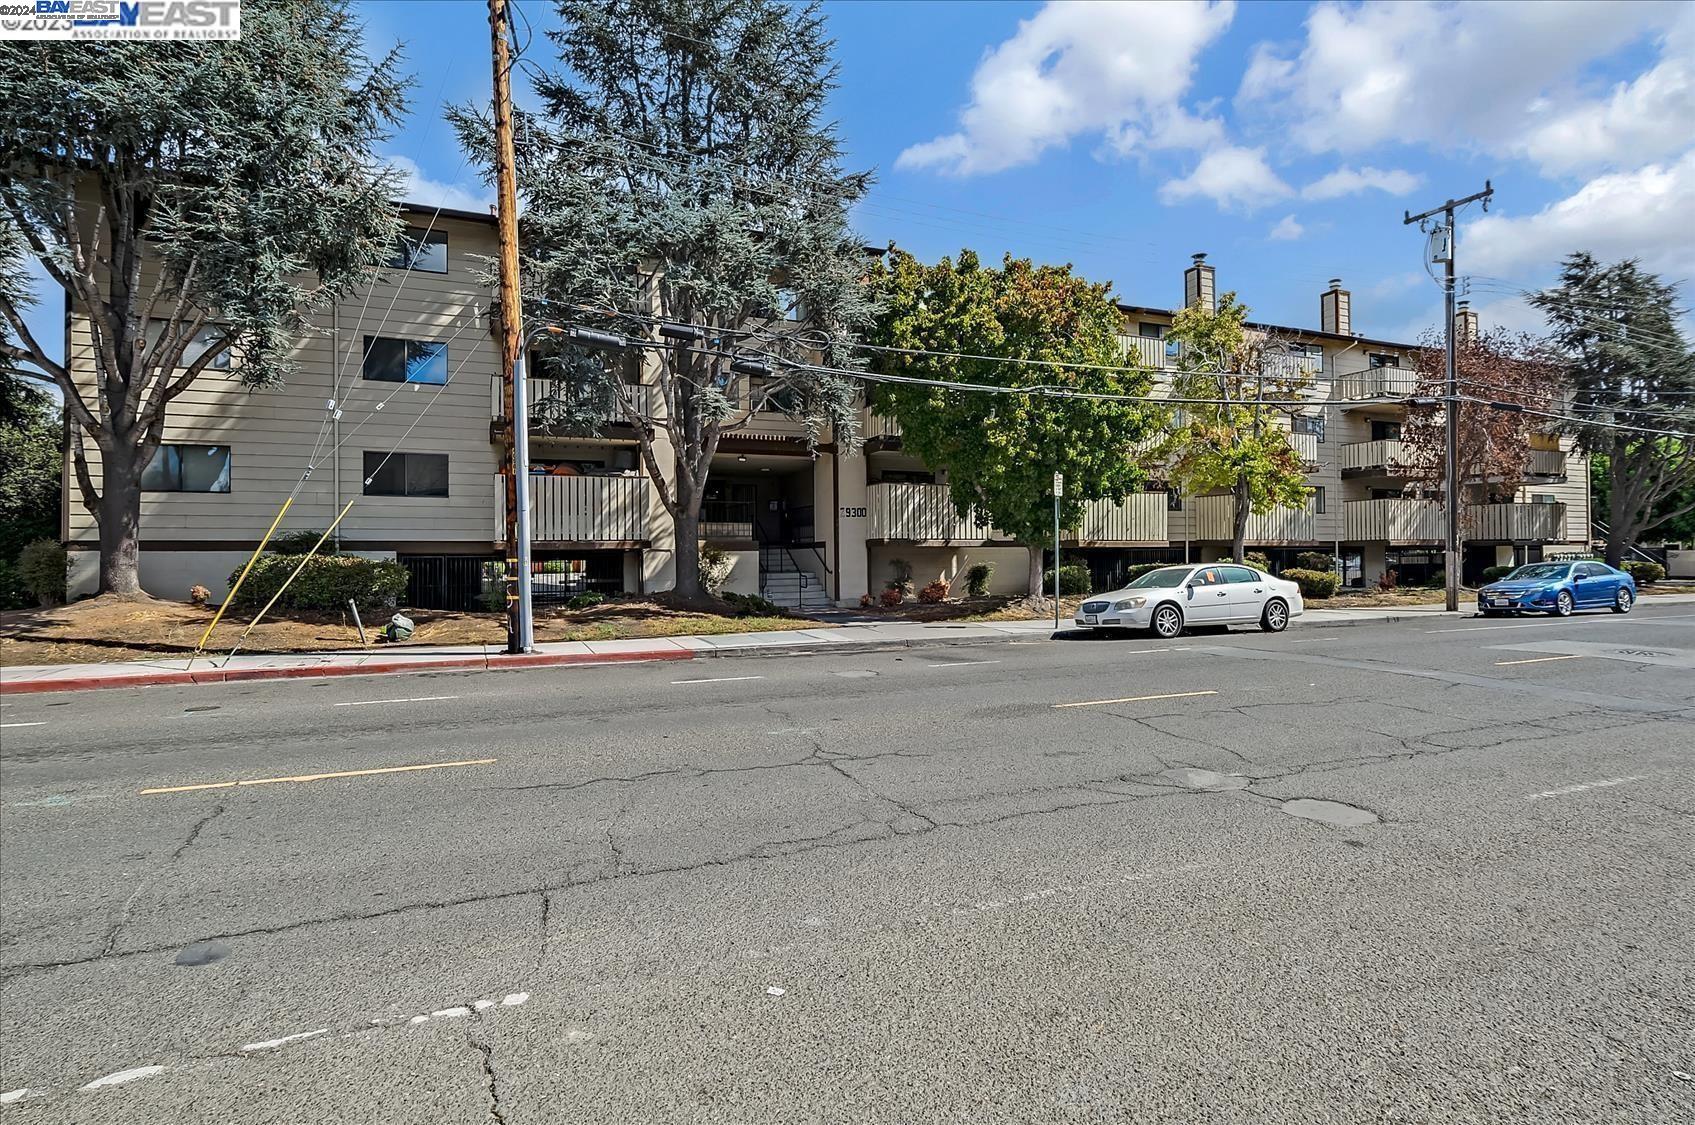 More Details about MLS # 41057551 : 325 VALLE VISTA AVE # 104